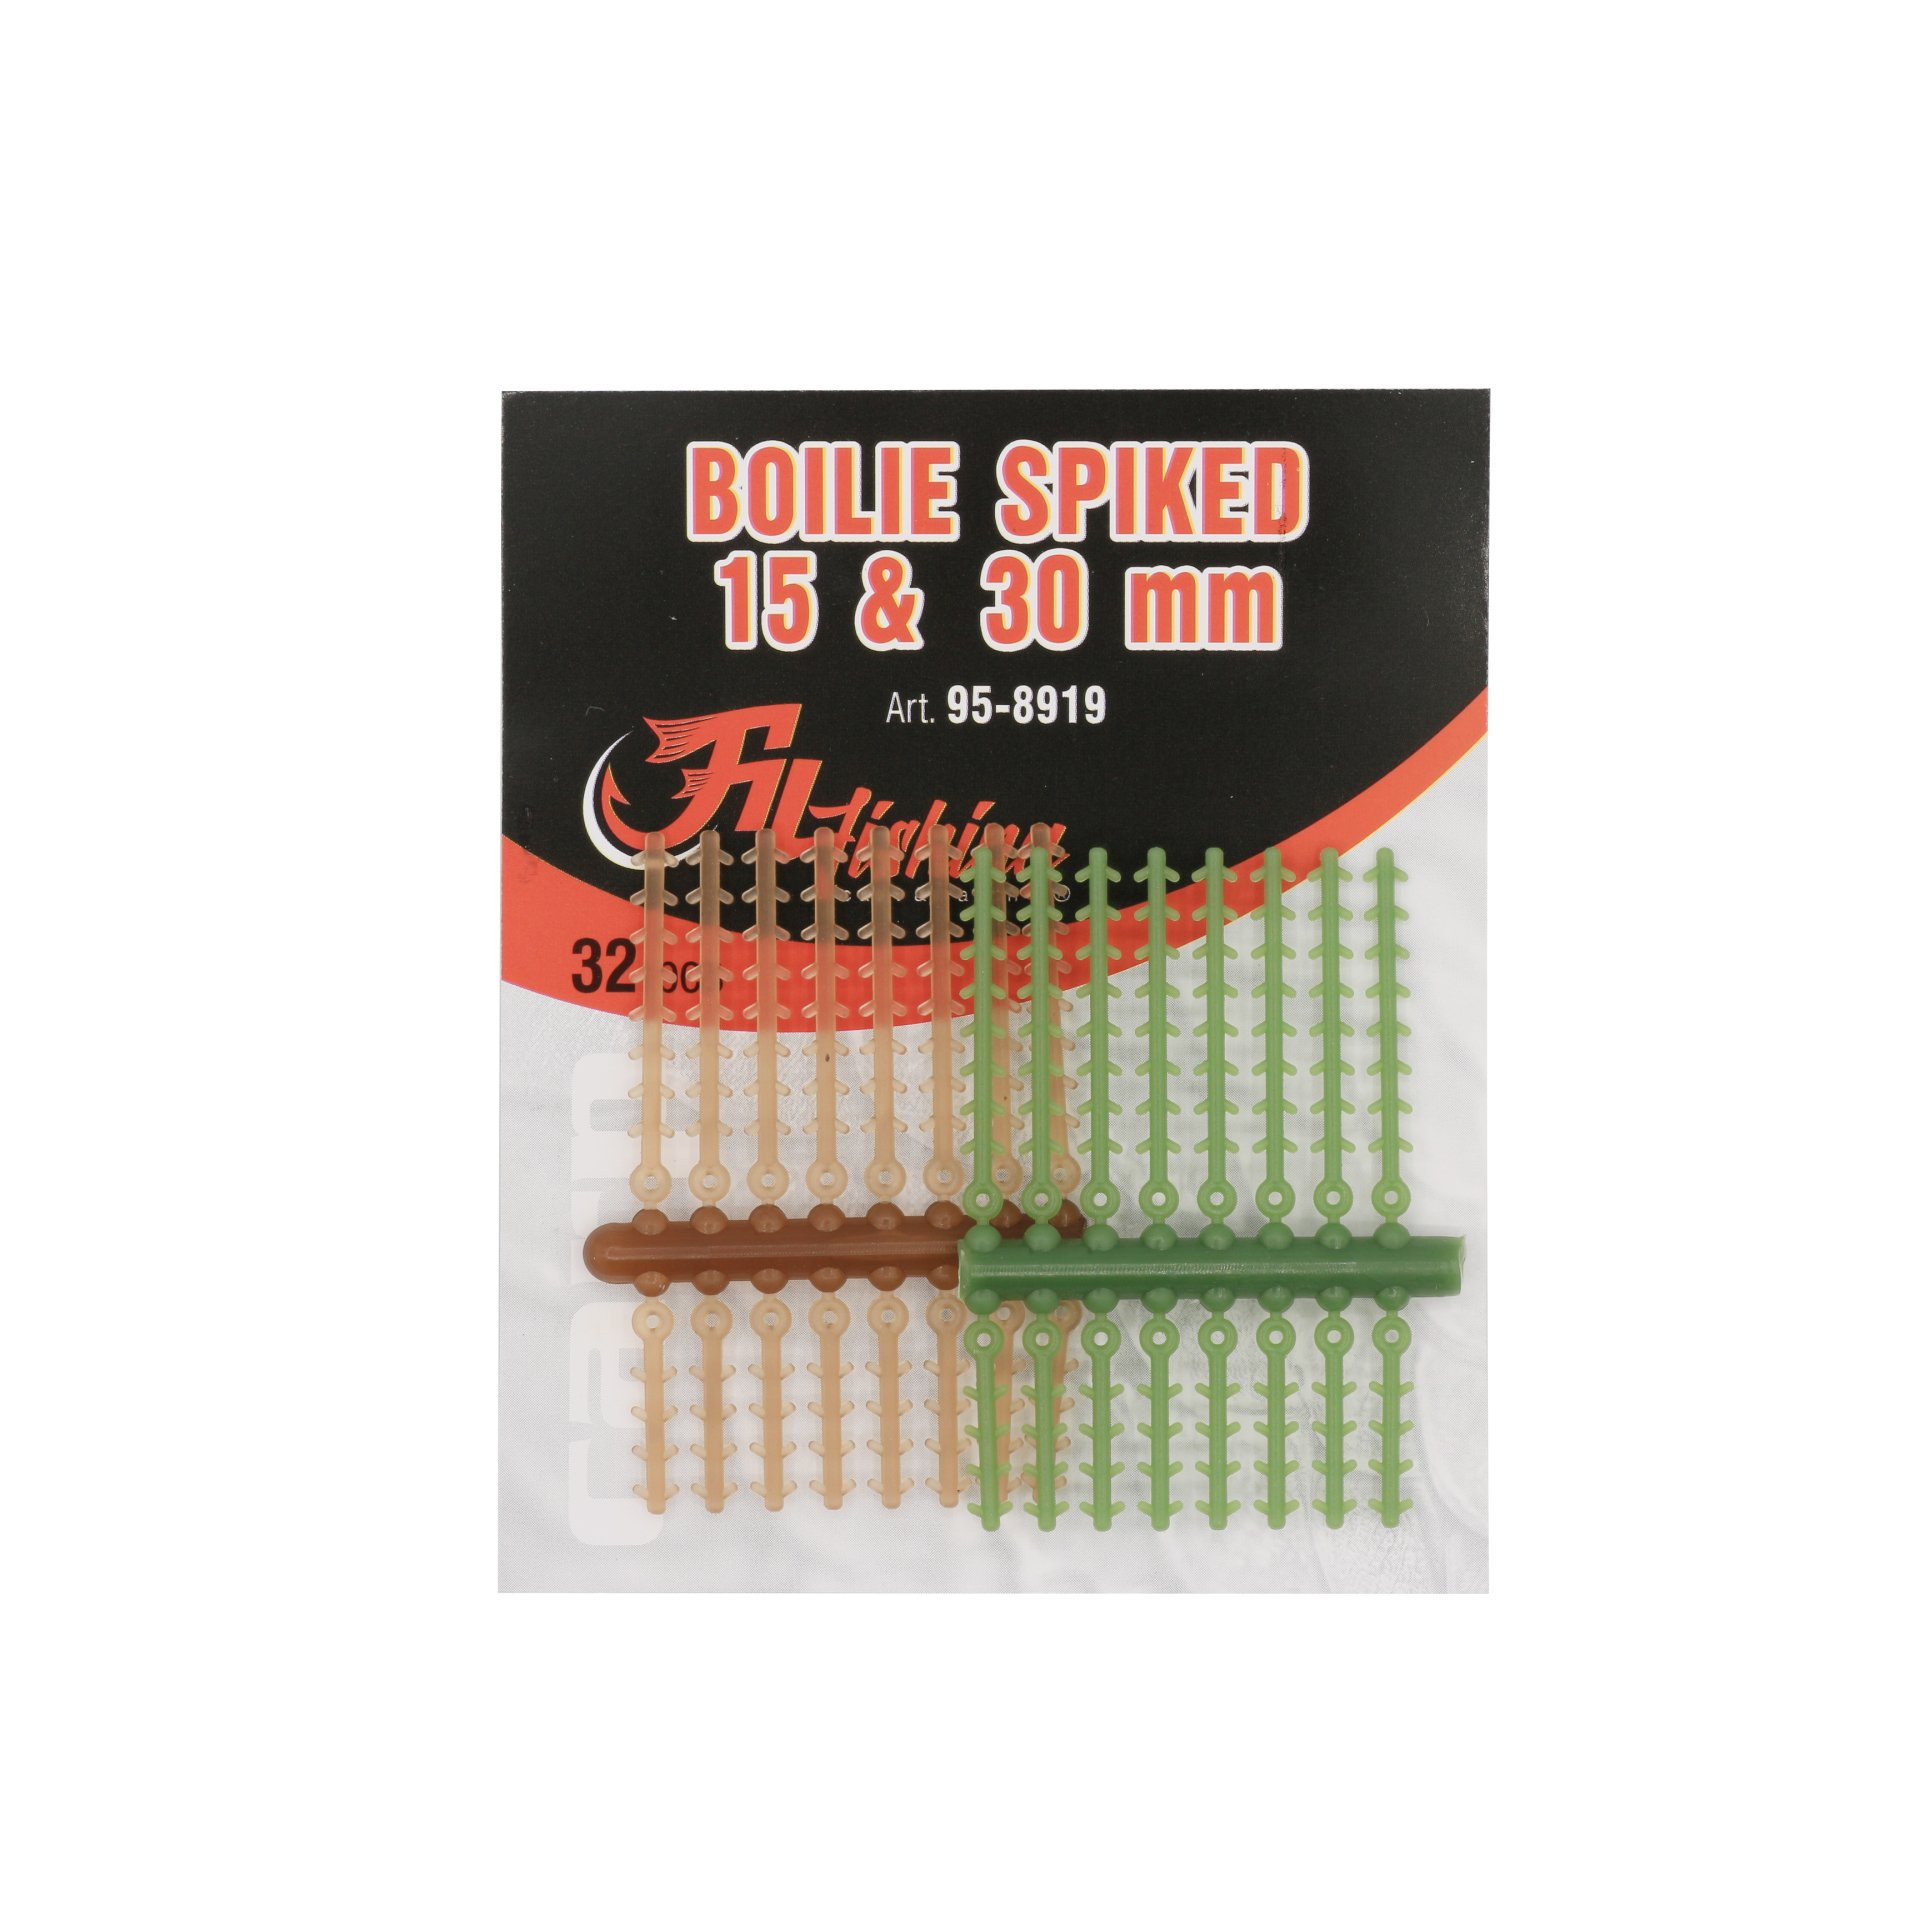 Fil Fishing Boilie Spiked 15 & 30mm 32pcs